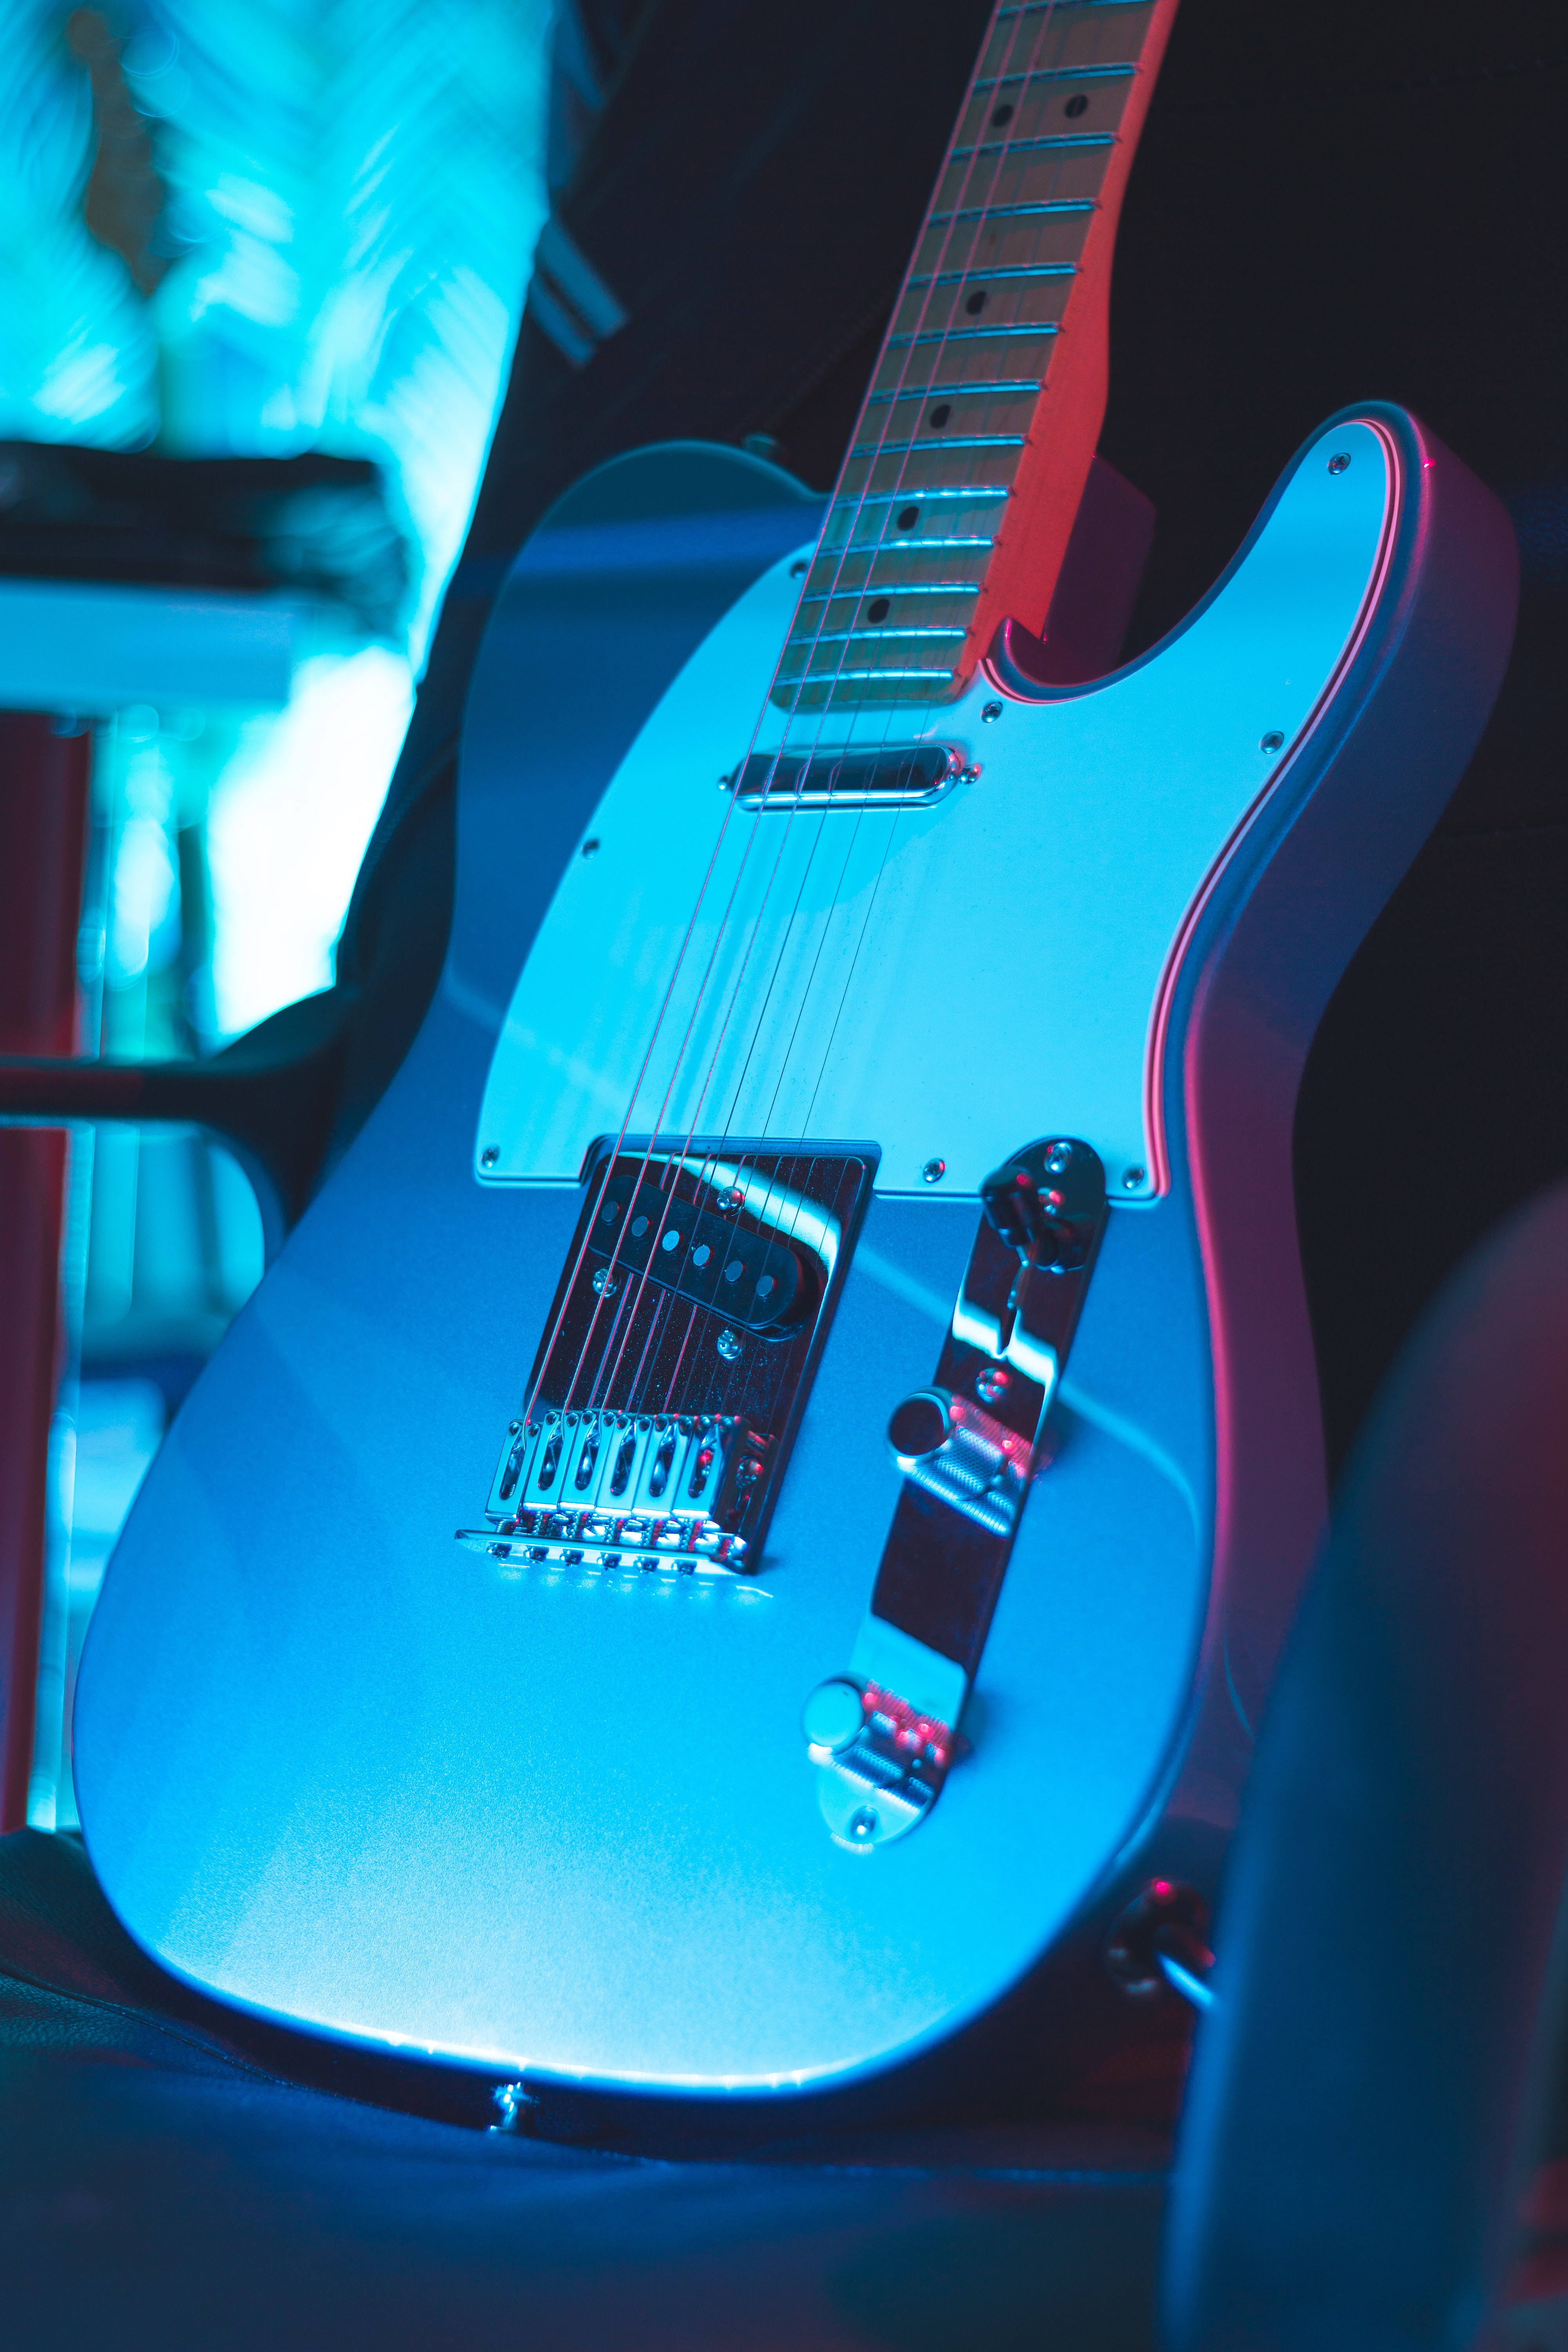 guitar, musical instrument, music, neon, electronic High Definition image